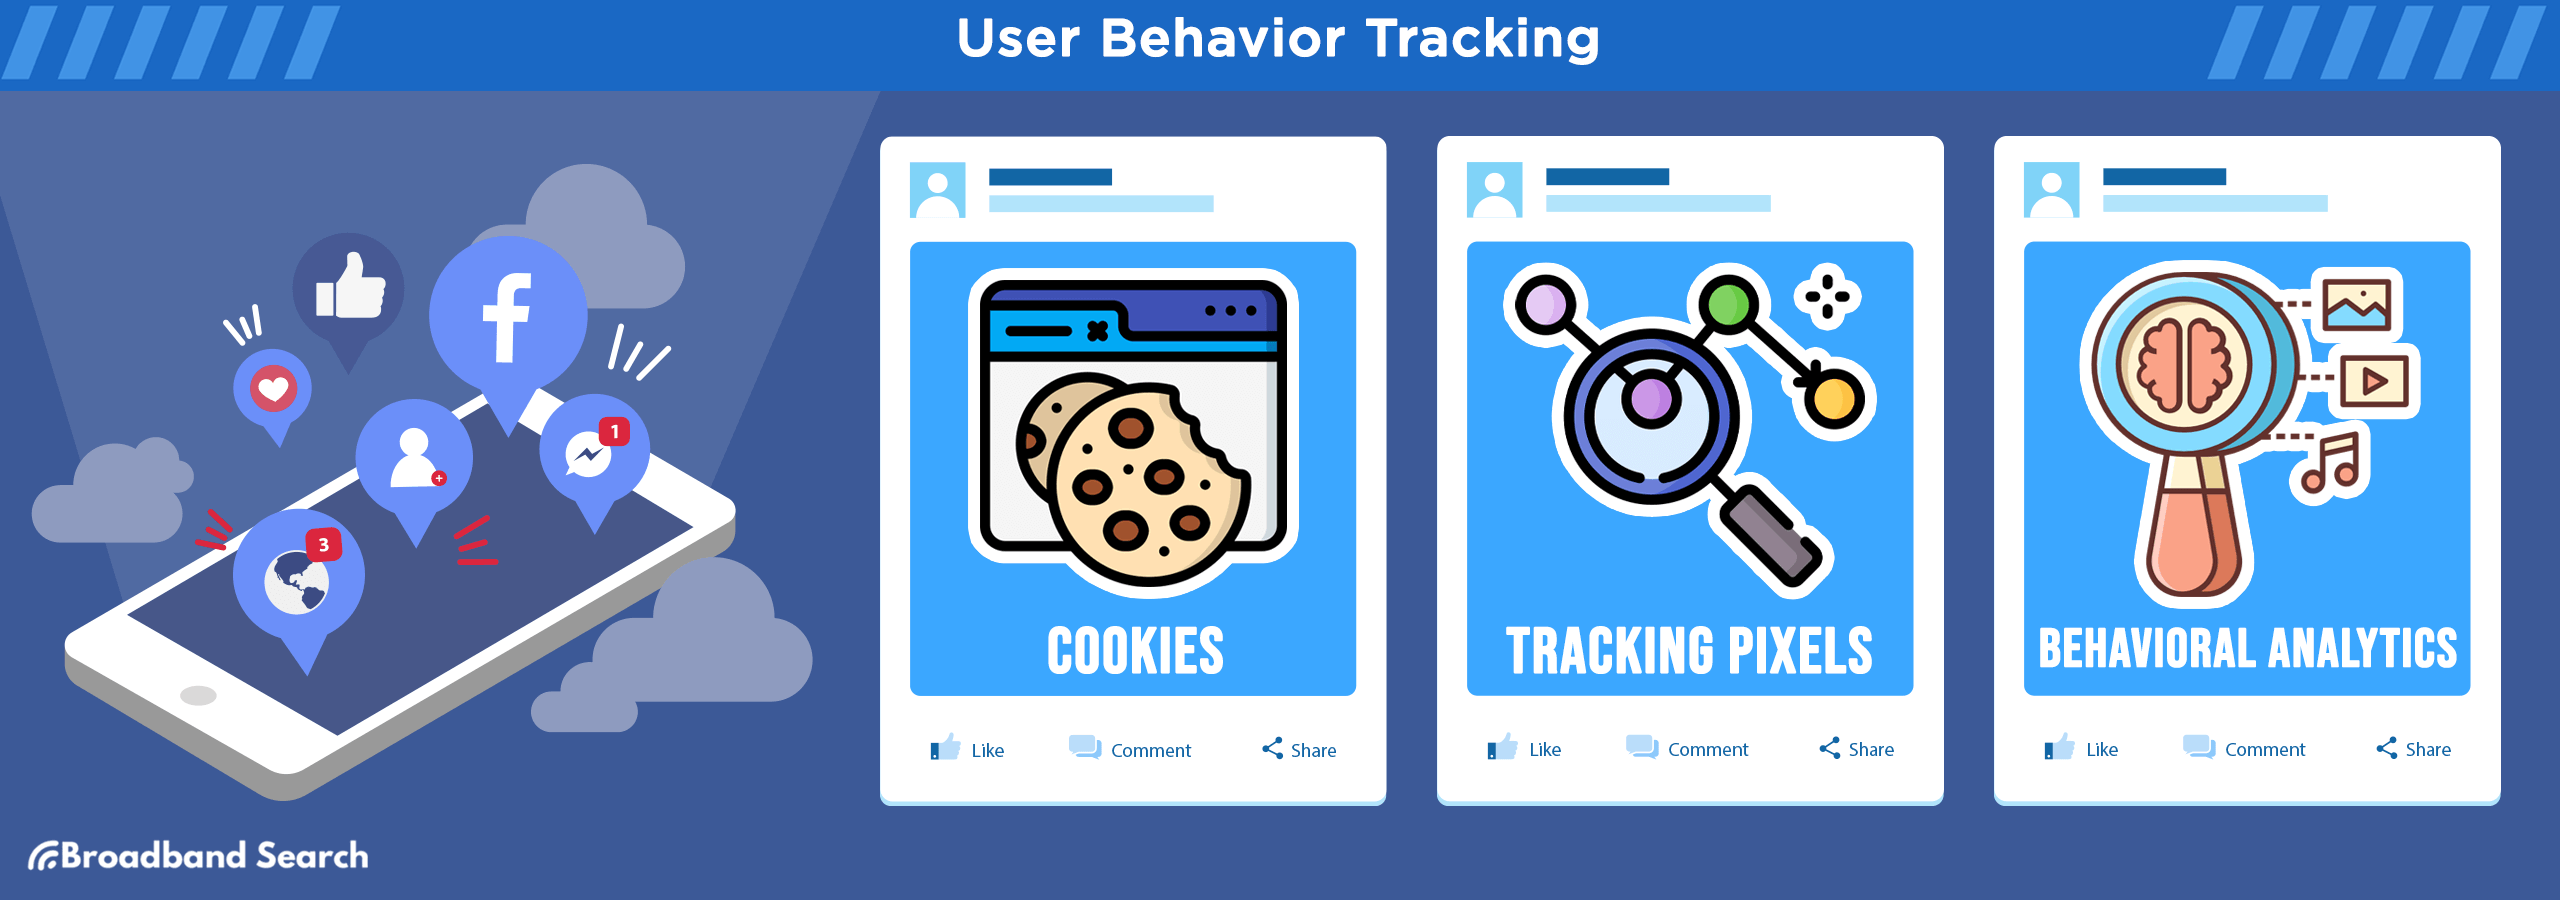 User Behavior tracking methods used by facebook such as cookies, tracking pixels and behavioral analytics